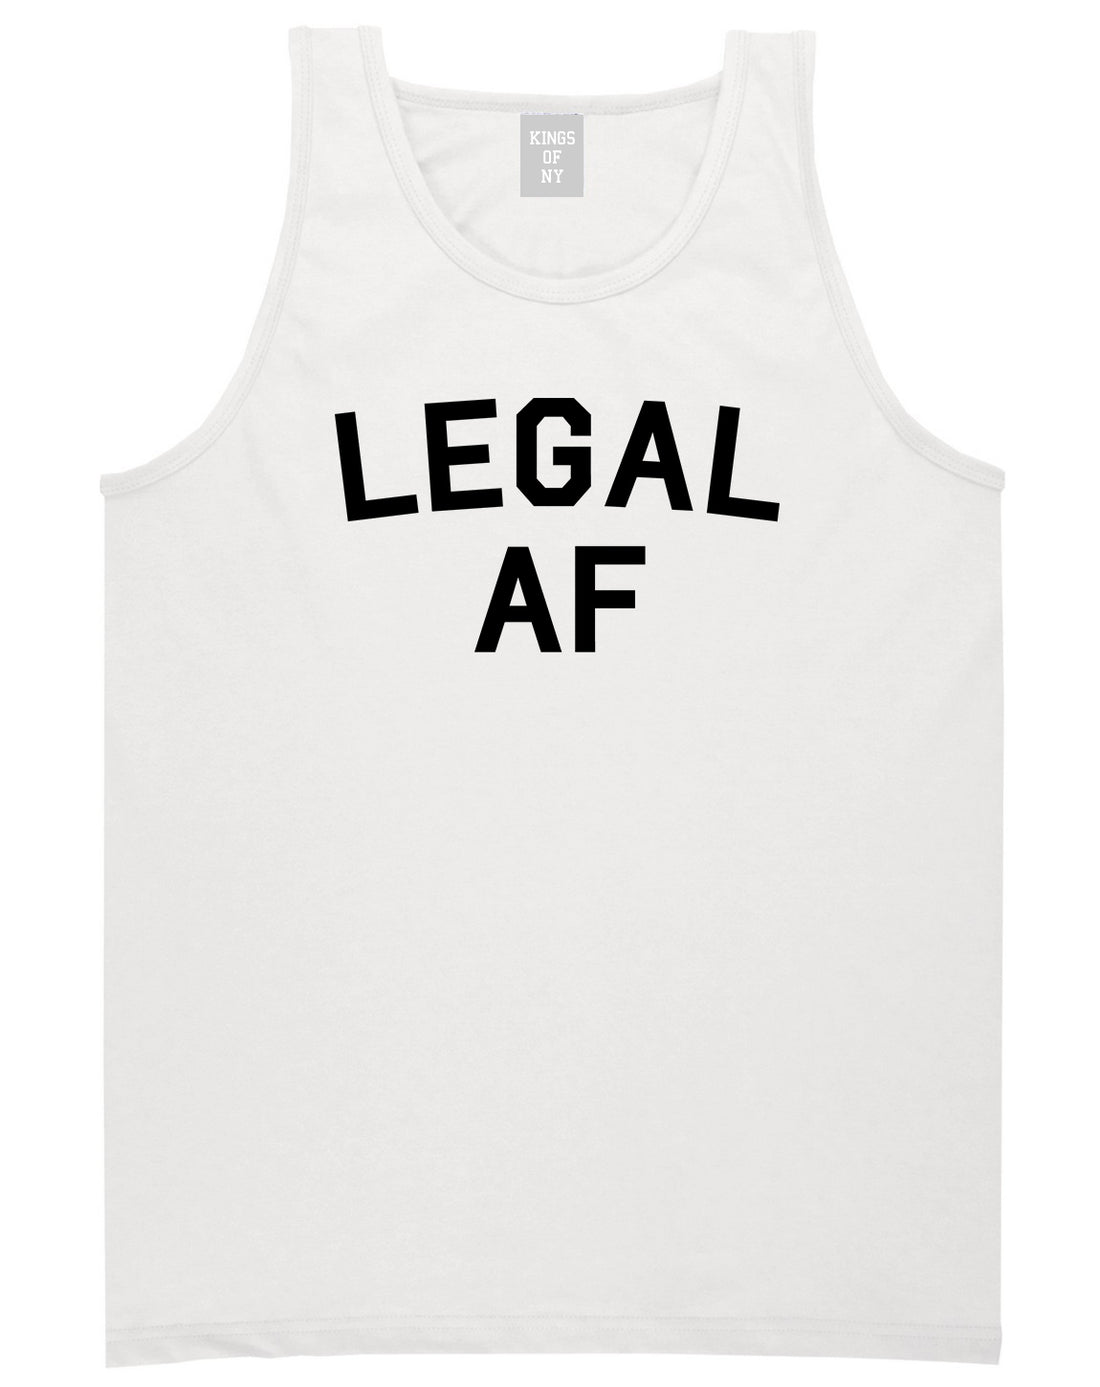 Legal AF 21st Birthday Mens Tank Top Shirt White by Kings Of NY